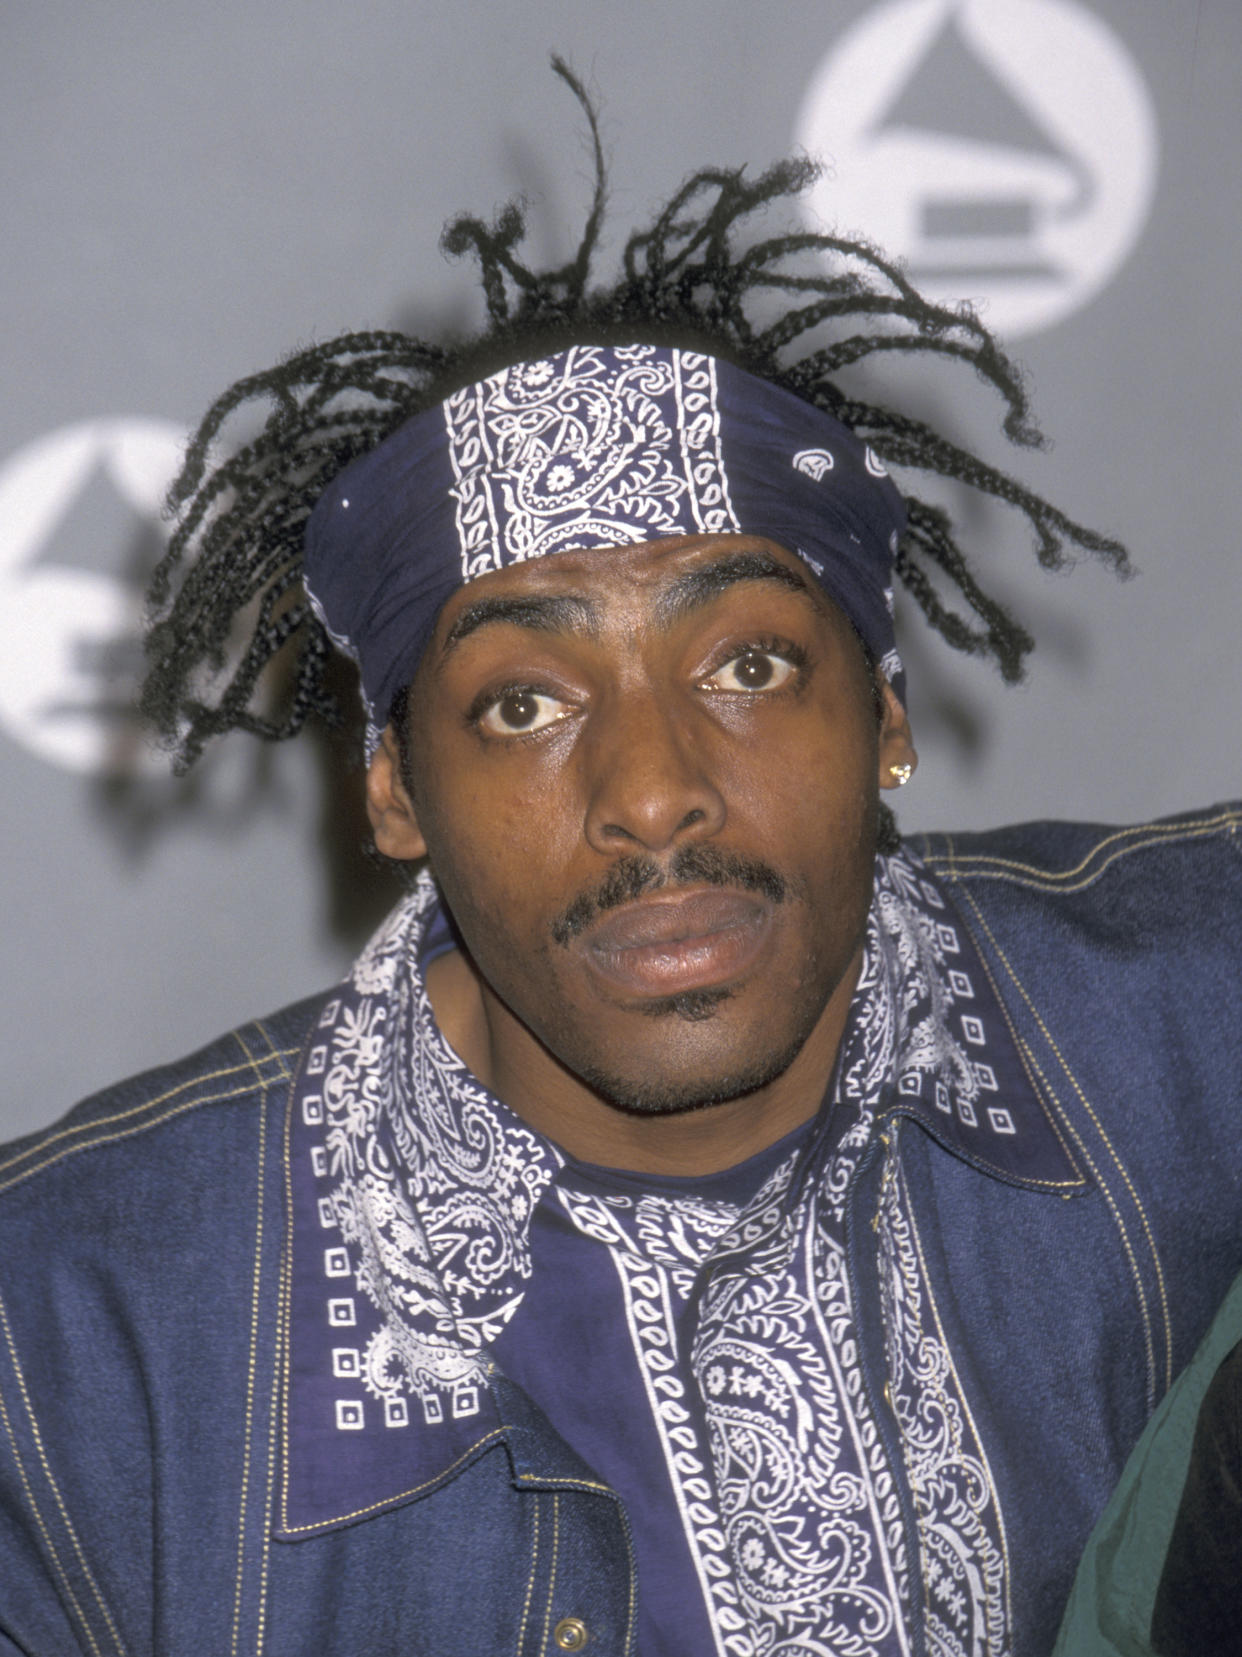 Rapper Coolio attends the 36th Annual Grammy Awards on February 28, 1996 at Shrine Auditorium in Los Angeles, California. (Photo by Ron Galella, Ltd./Ron Galella Collection via Getty Images)